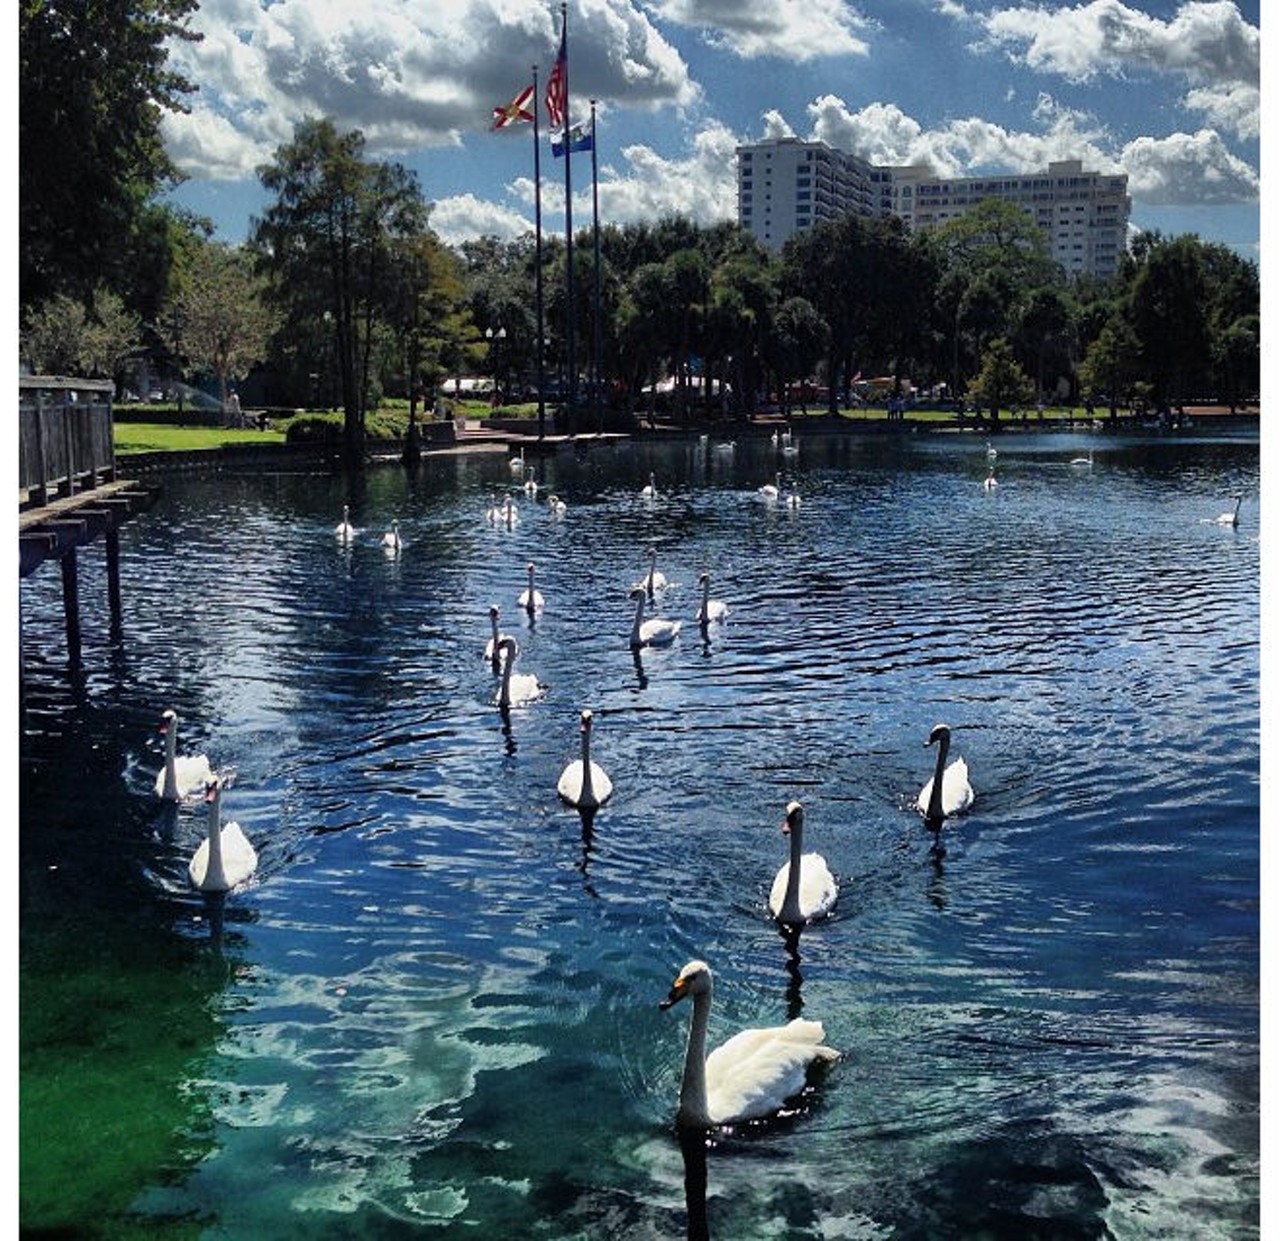 Feed one swan at Lake Eola and accidently become a Swan Lord     
Photo via vivihoge on Instagram